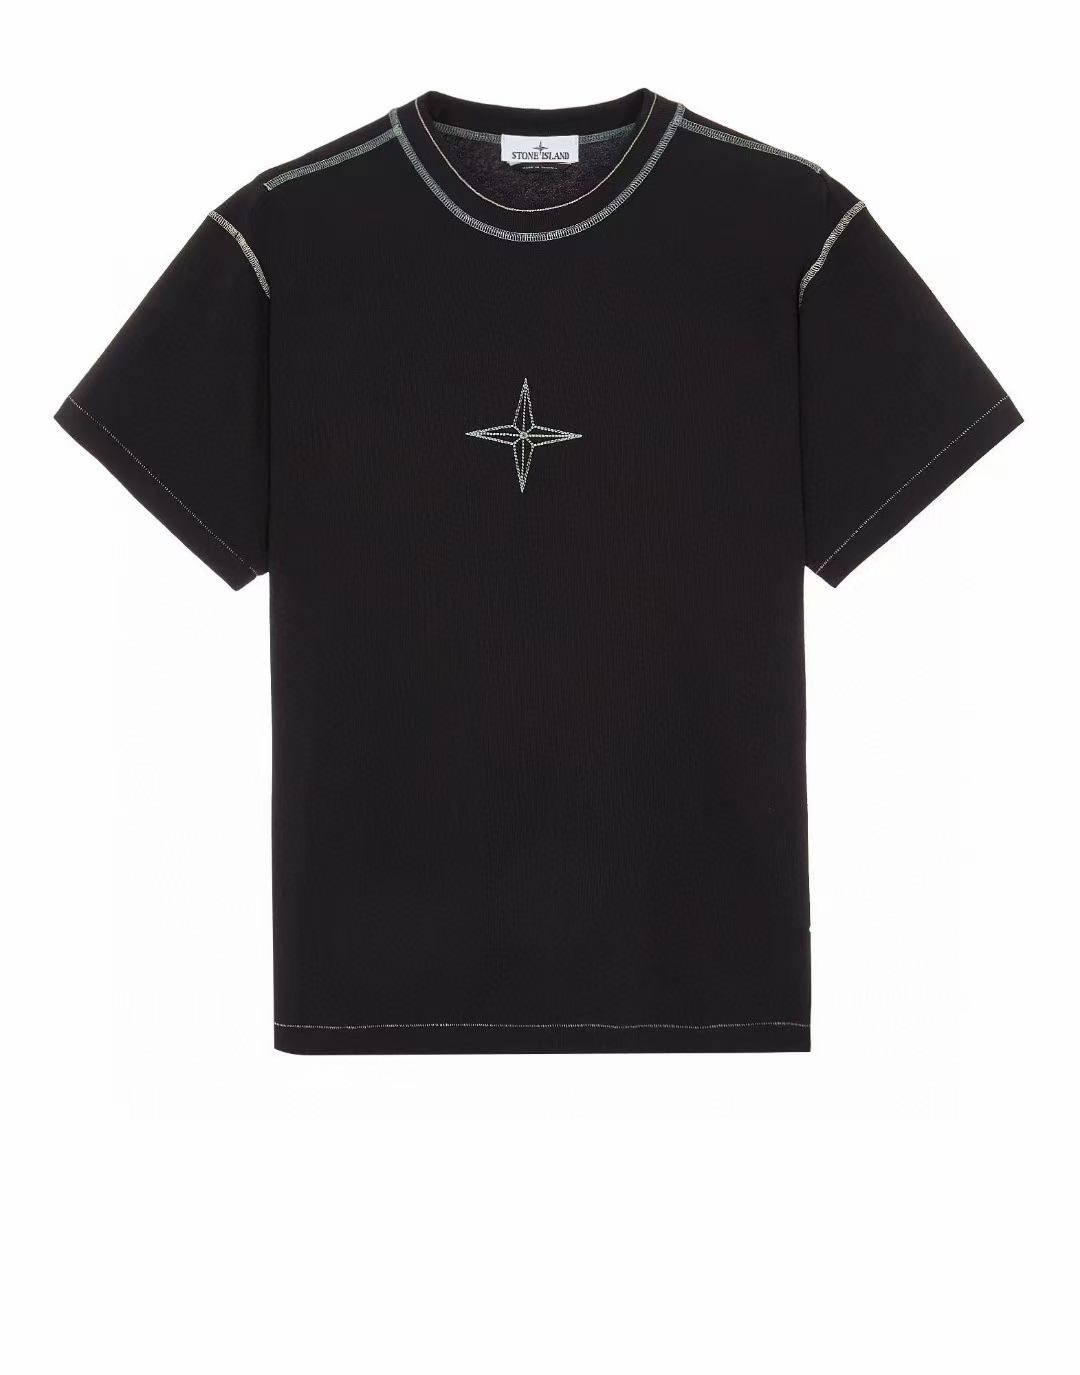 Stone Island Clothing T-Shirt Black Green Embroidery Combed Cotton